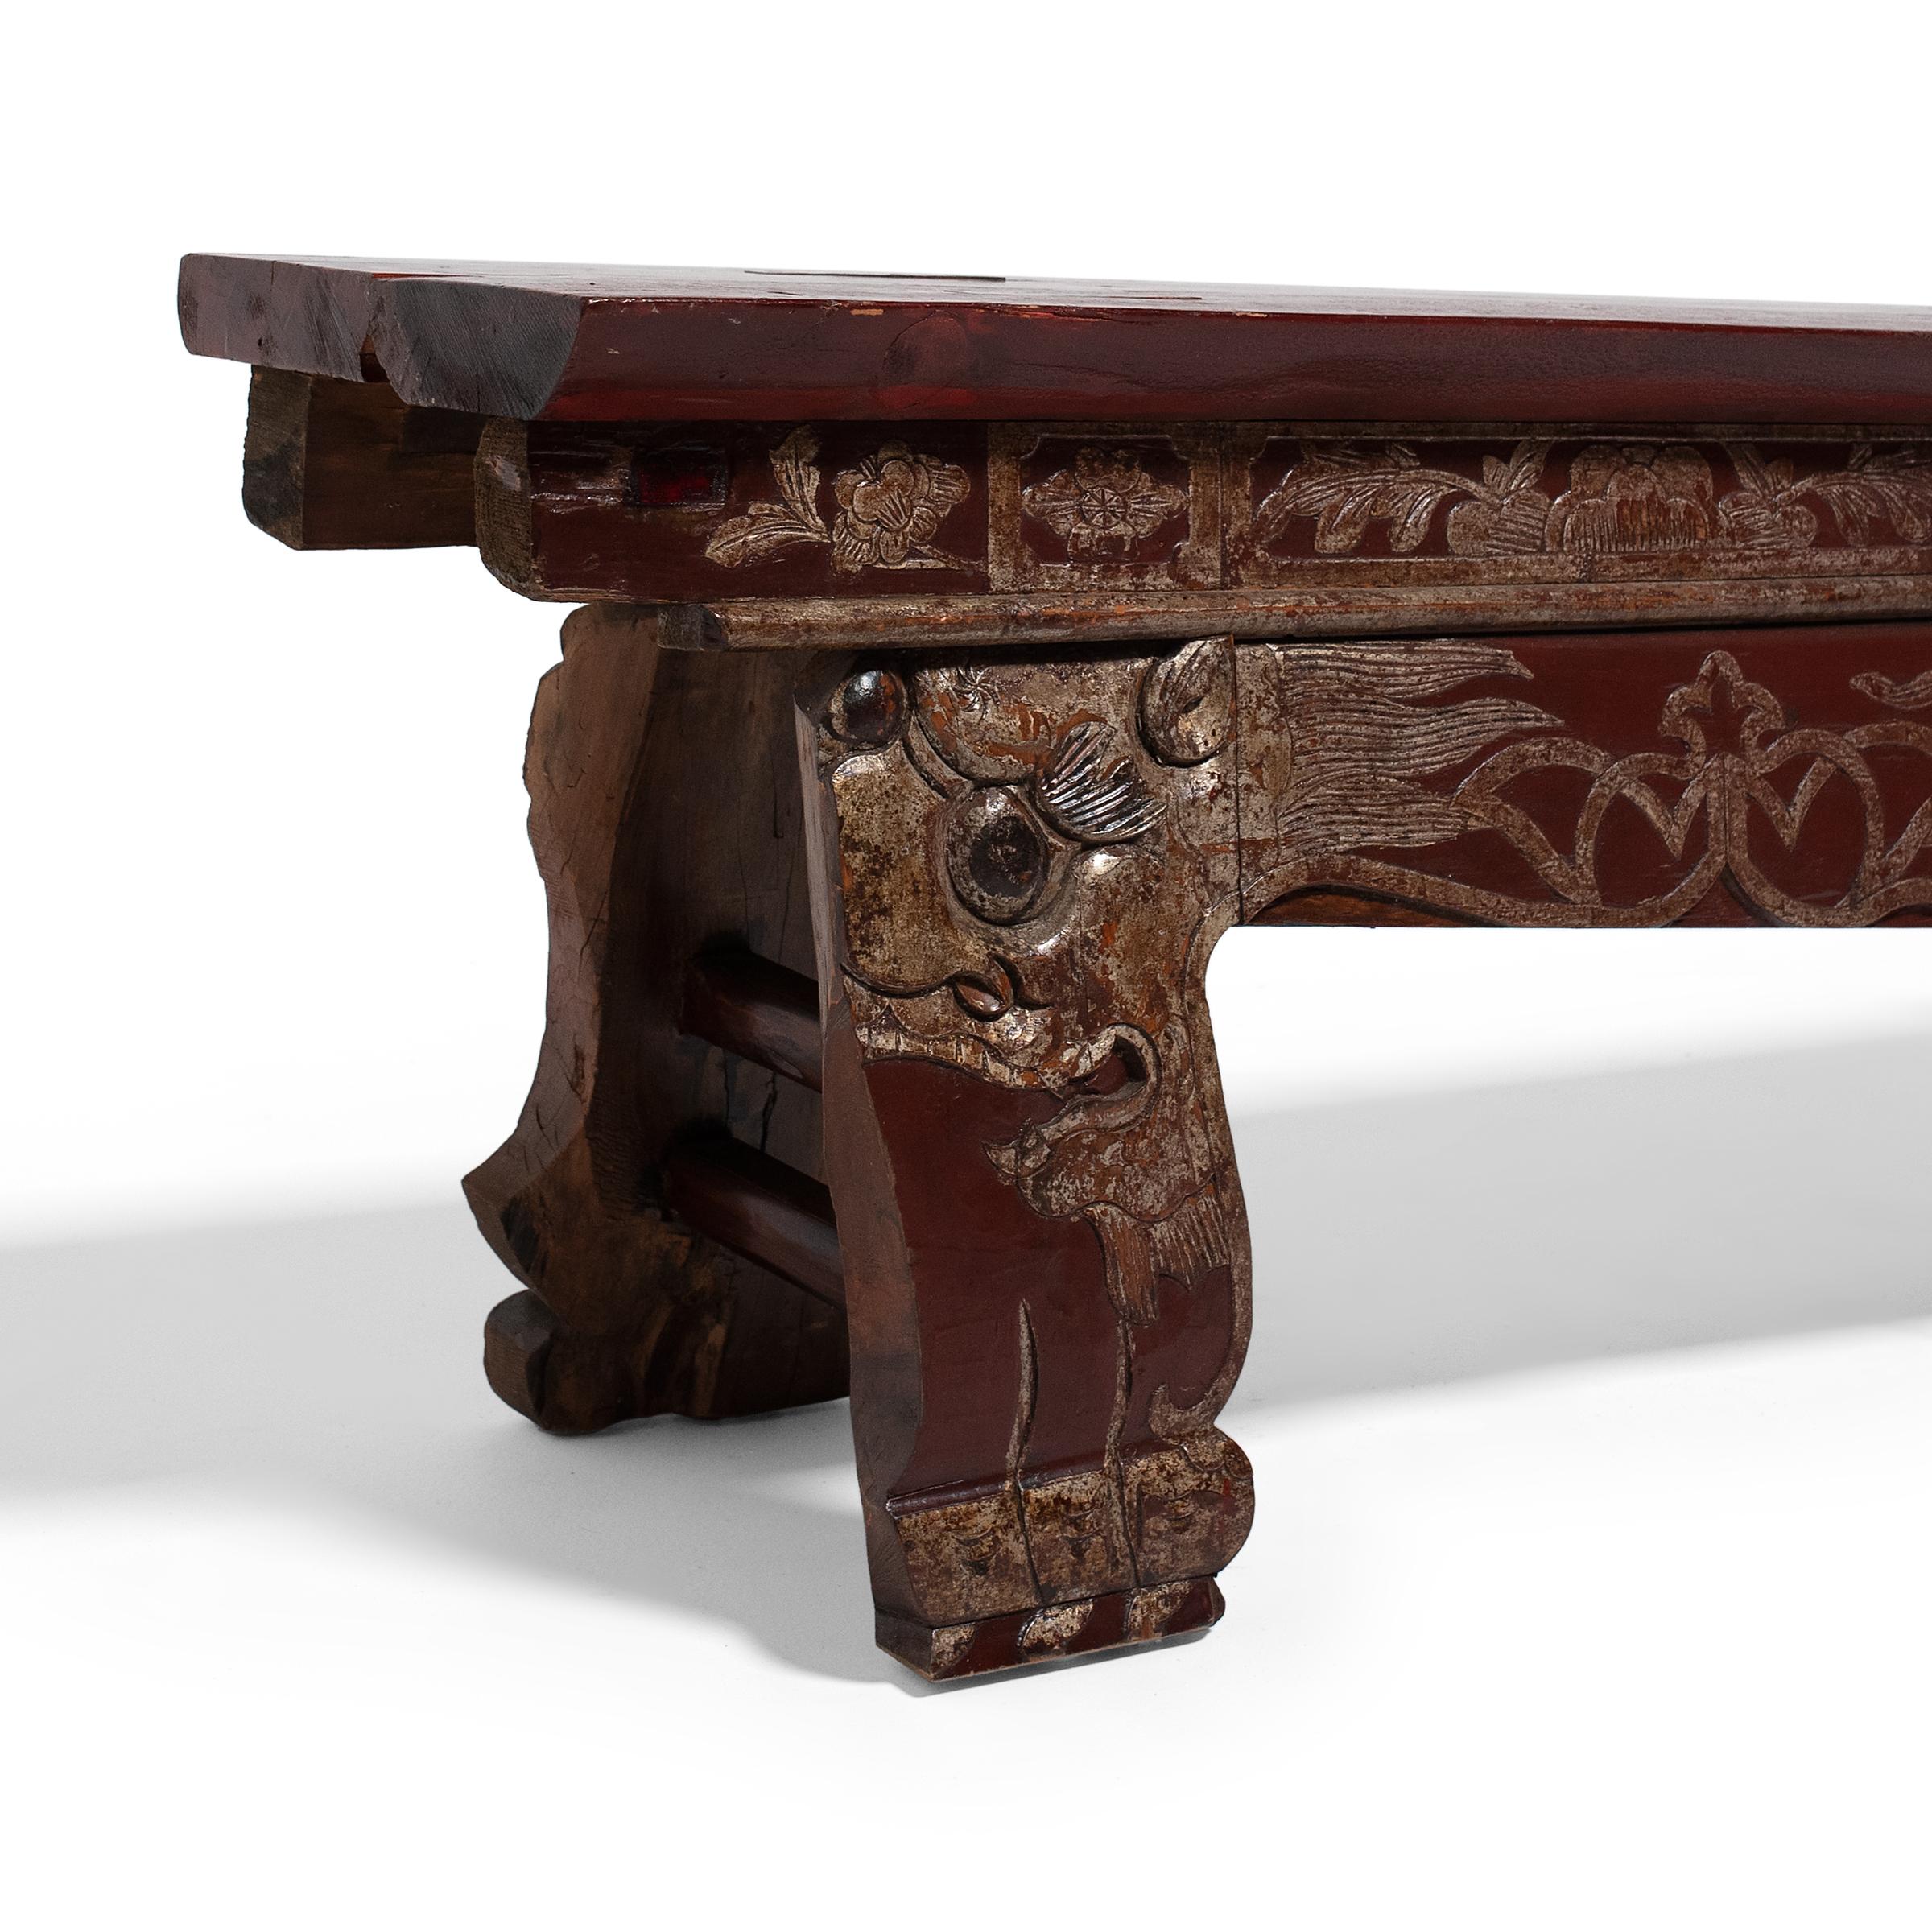 19th Century Chinese Lacquered Theater Bench with Dragon Carvings, c. 1850 For Sale